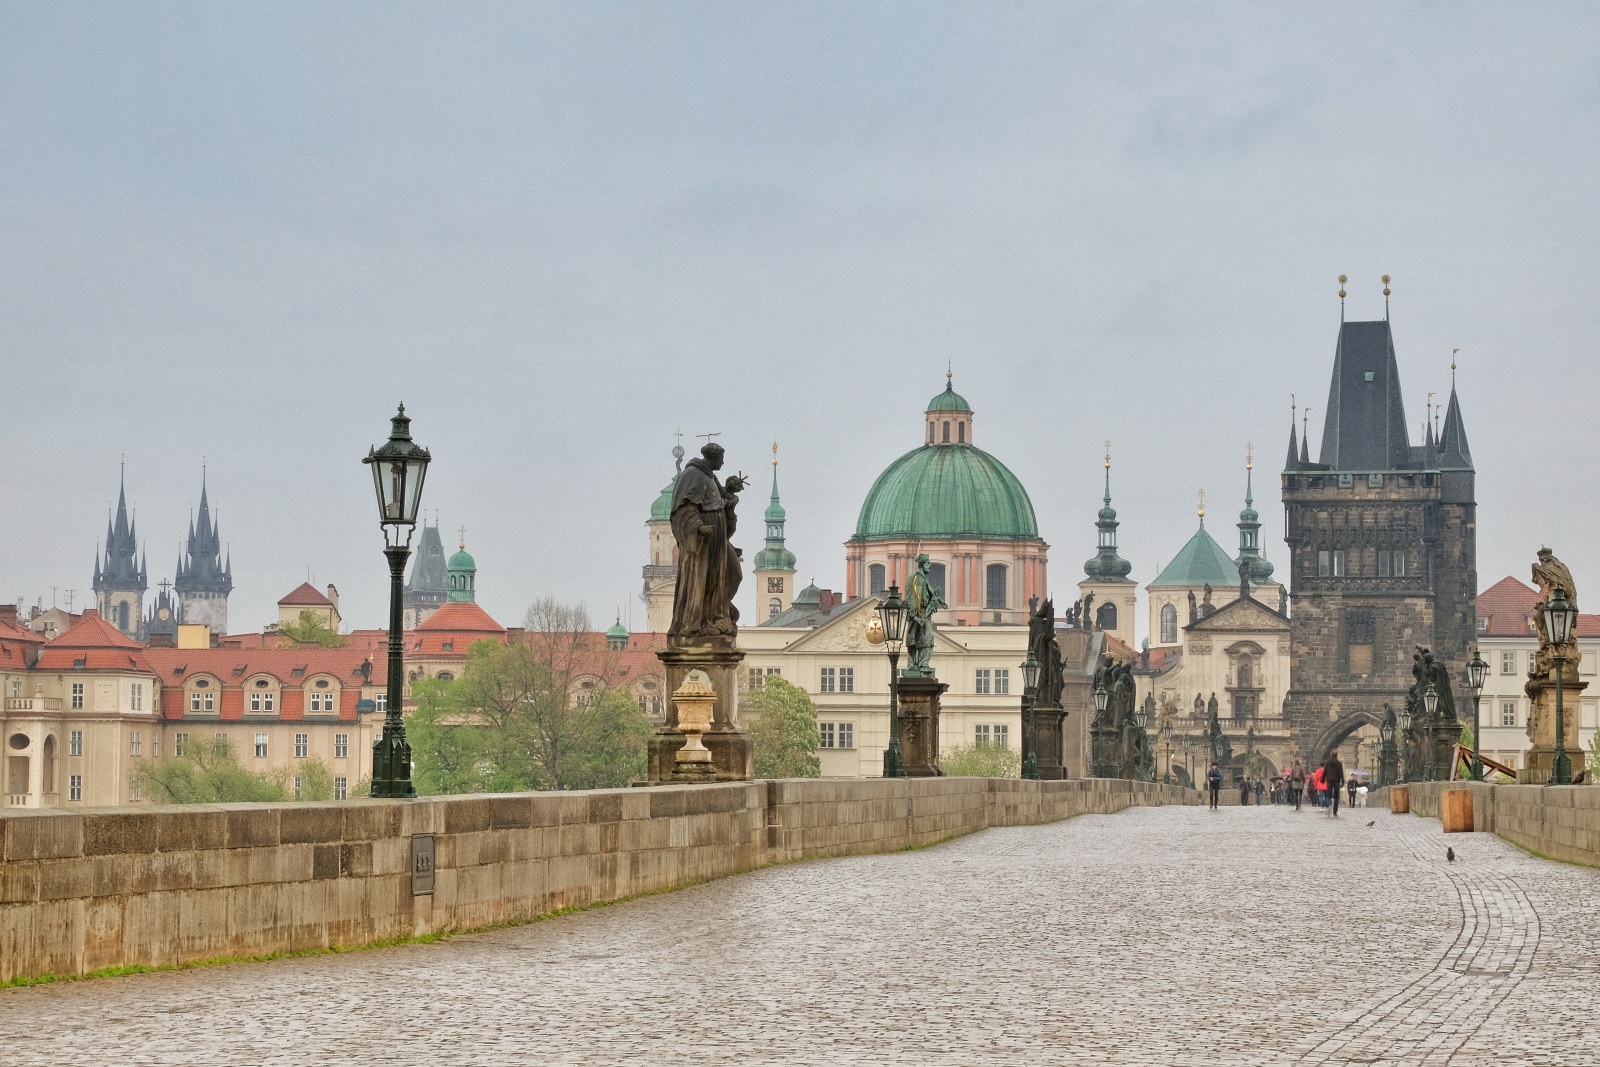 Early morning on Charles Bridge - Karlův most, statues, spires and domes of Prague's old town. Travel photography by Kent Johnson.